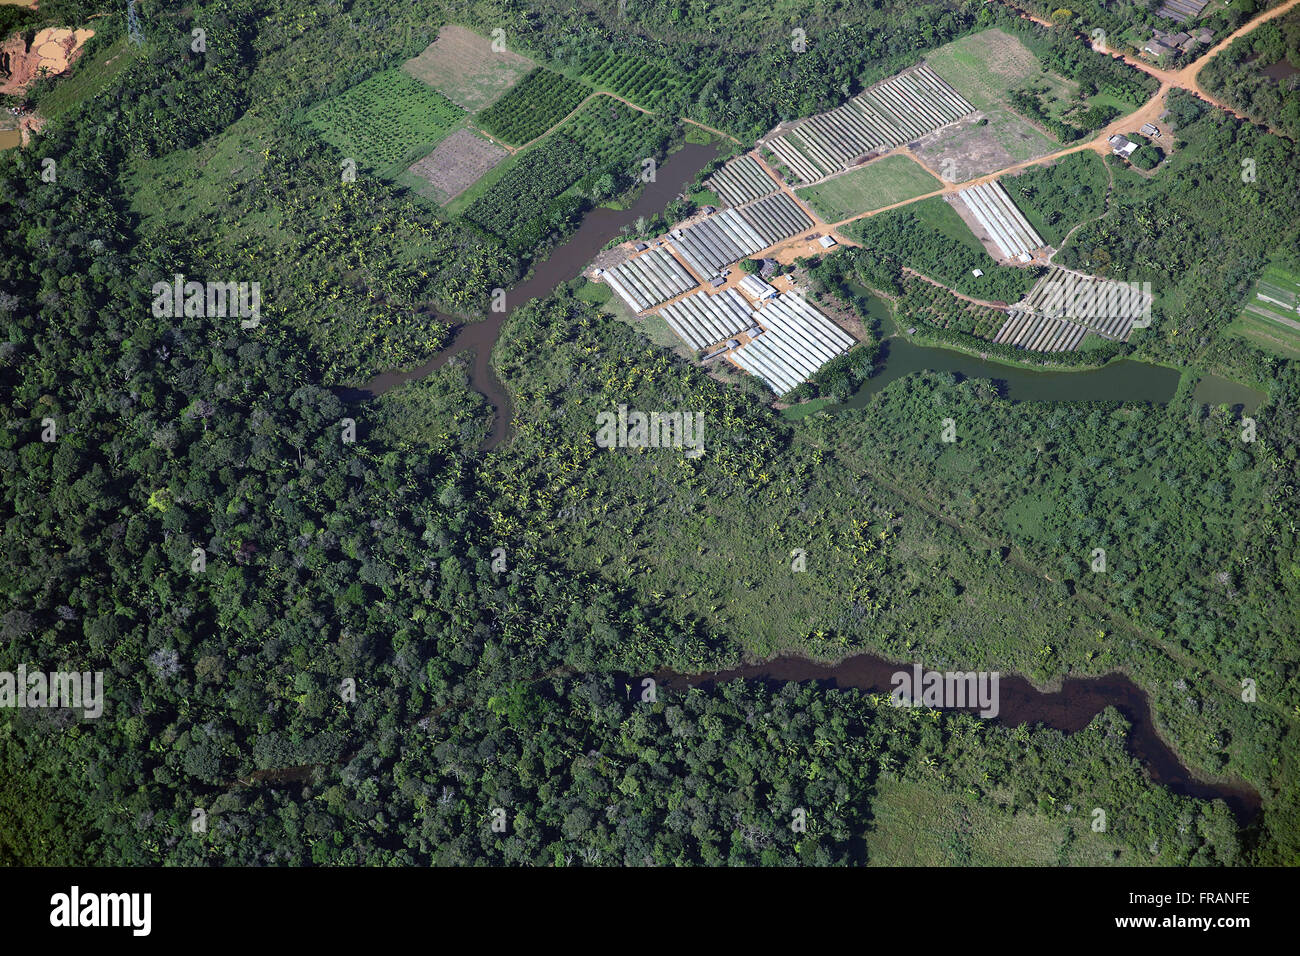 Aerial view of the horticultural production in the outskirts of town Stock Photo